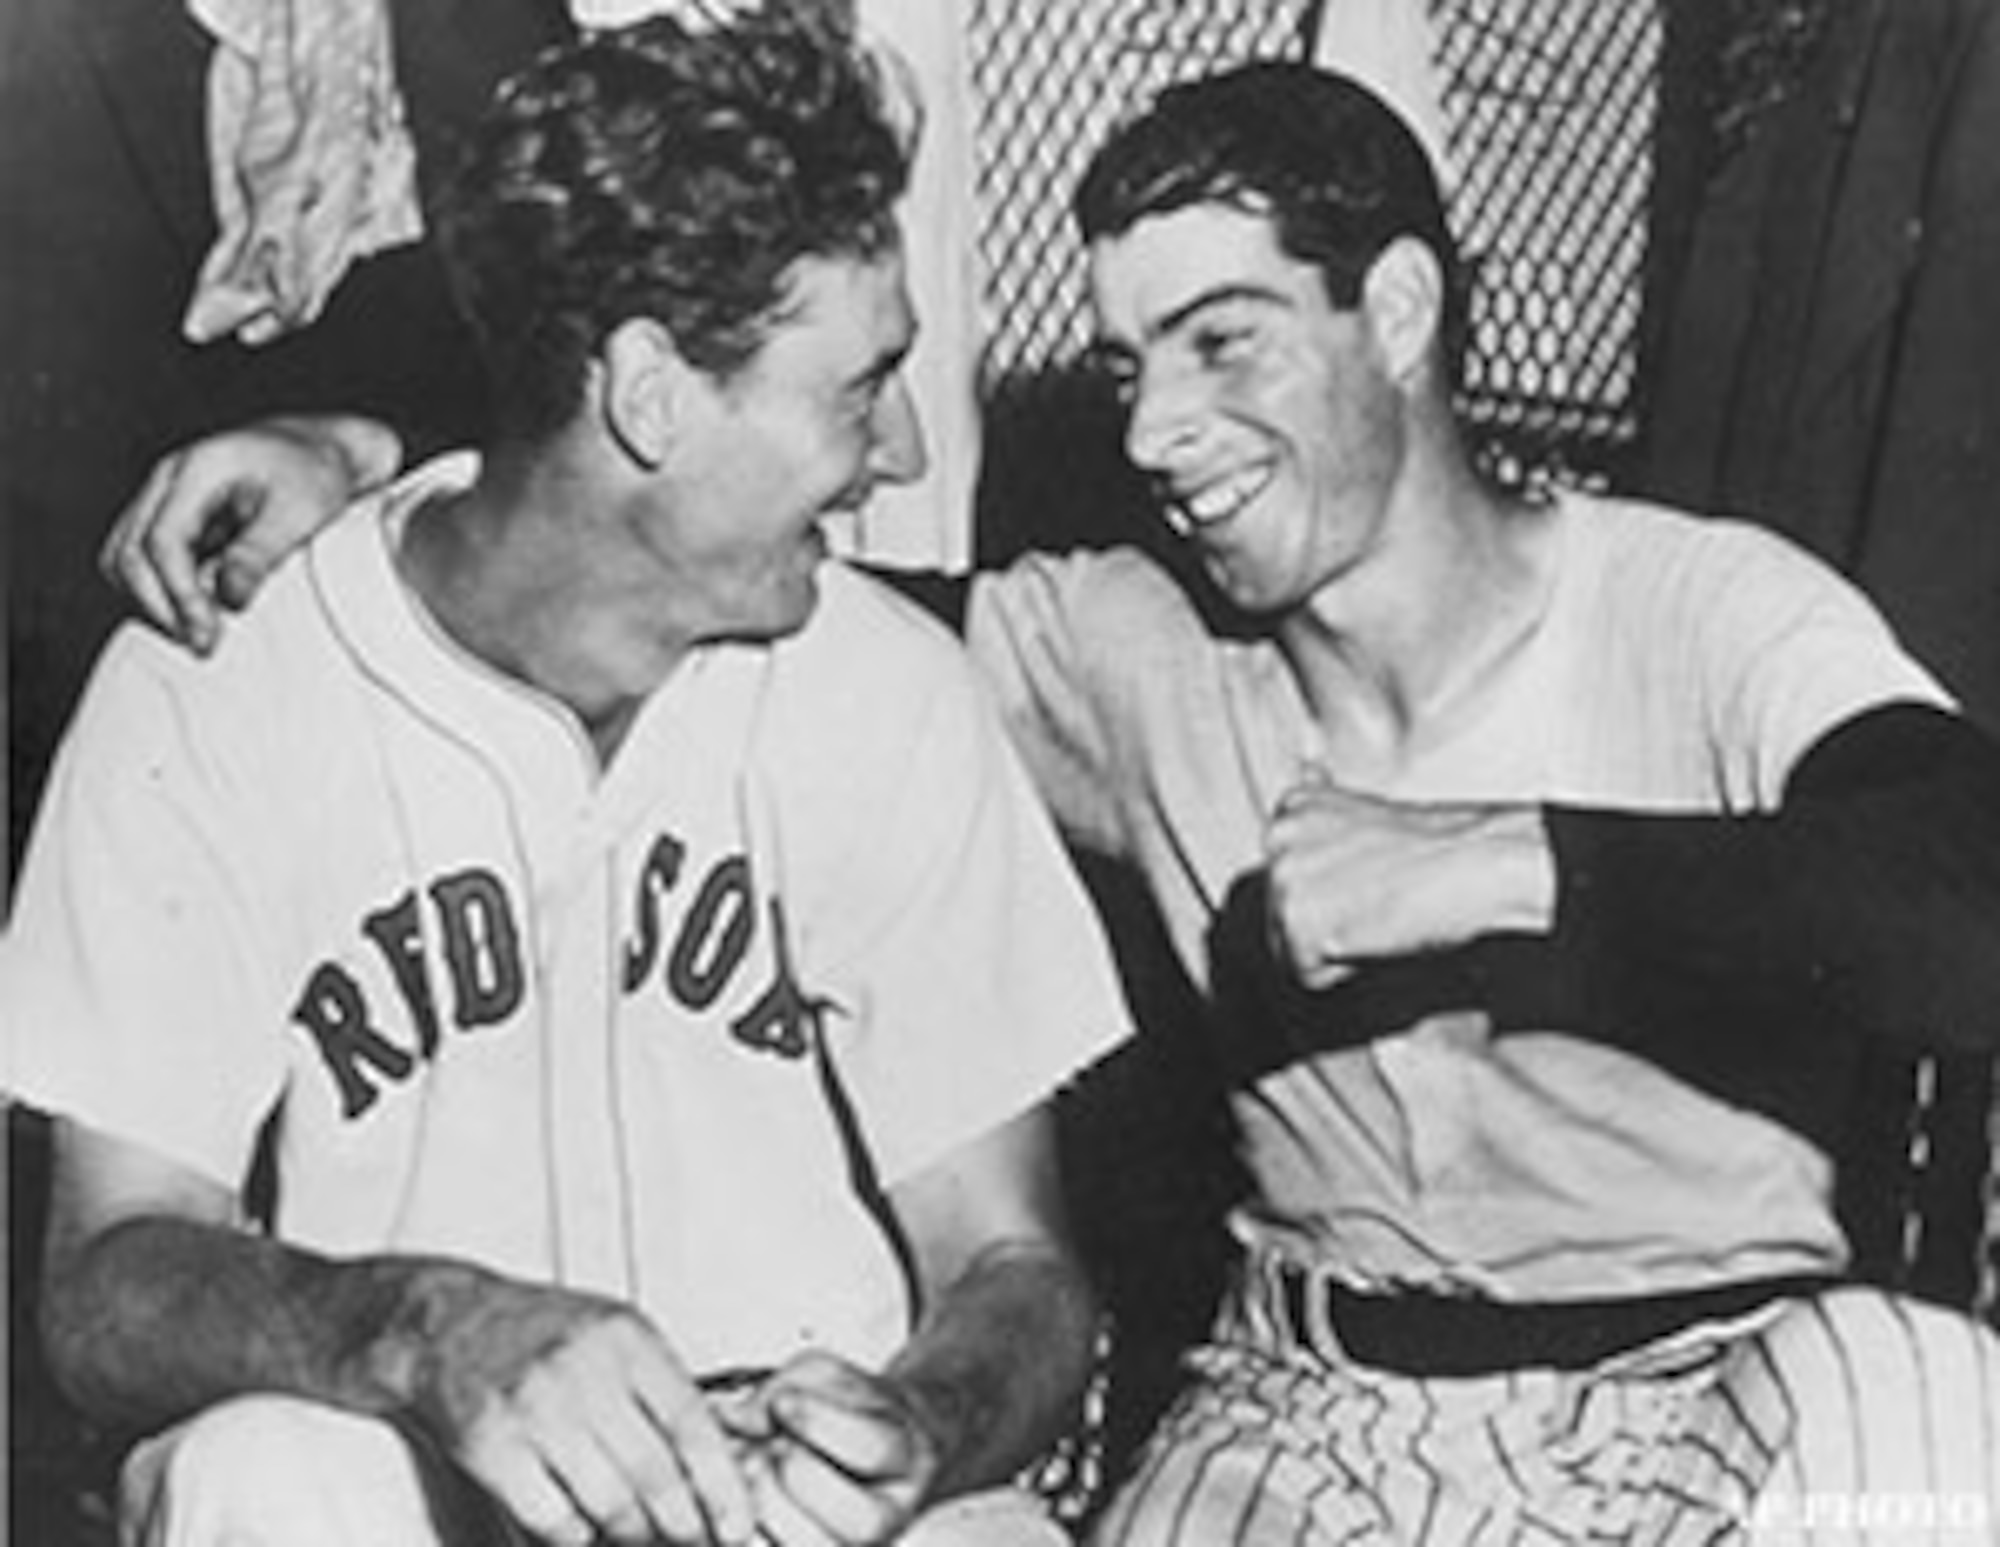 Major League baseball players Ted Williams, who fought as a Marine combat pilot in World War II and Korea, and Joe DiMaggio, who served as a supply sergeant in the 7th Army Air Force team. (Courtesy photo)